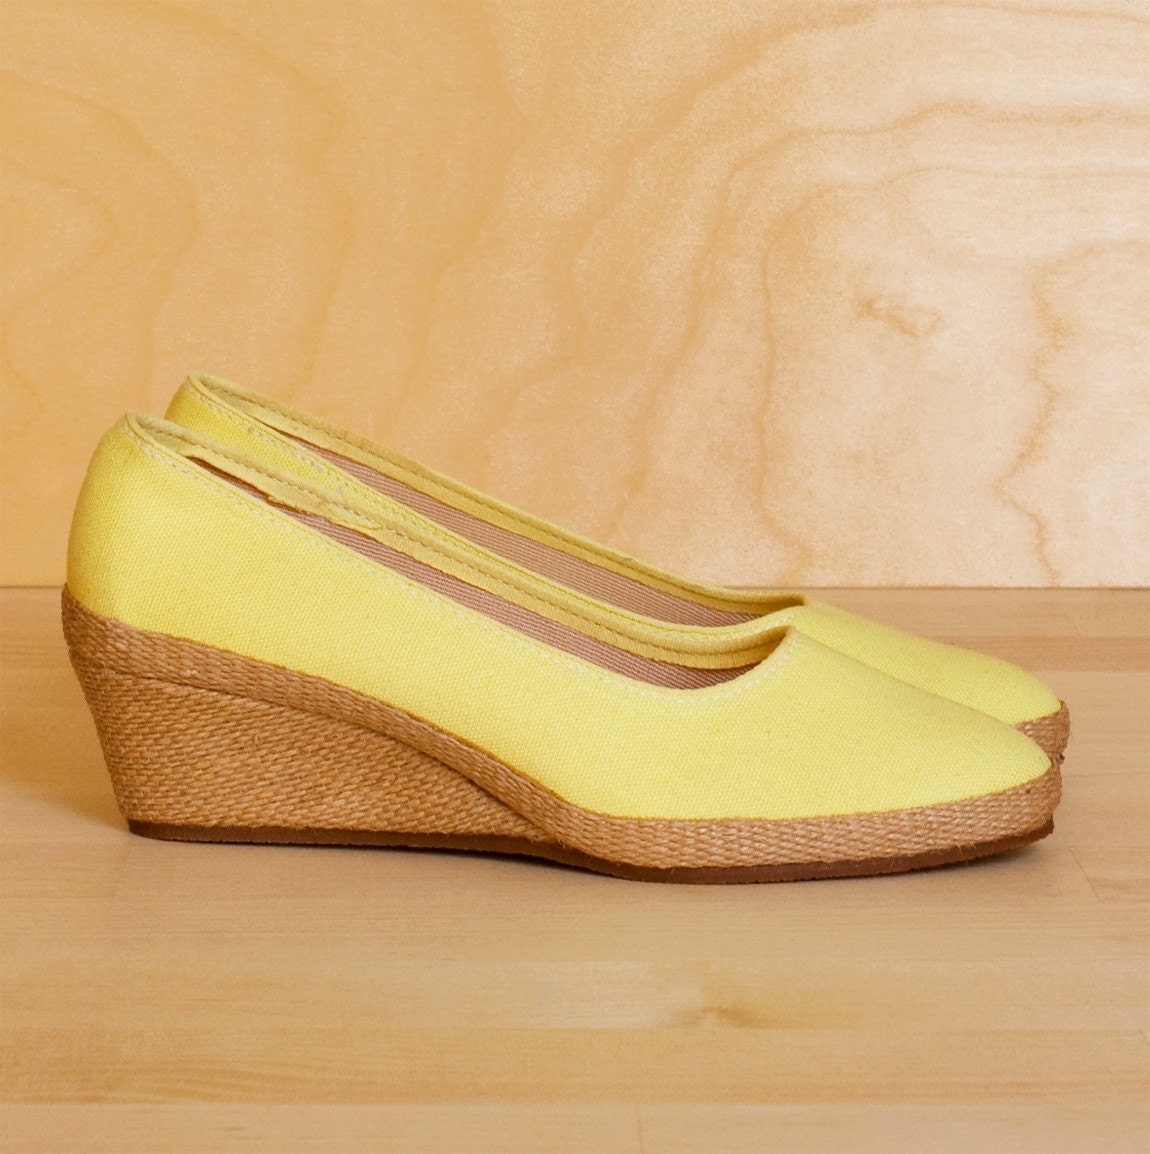 Vintage Beacon canary yellow canvas espadrille wedges. by kenaione